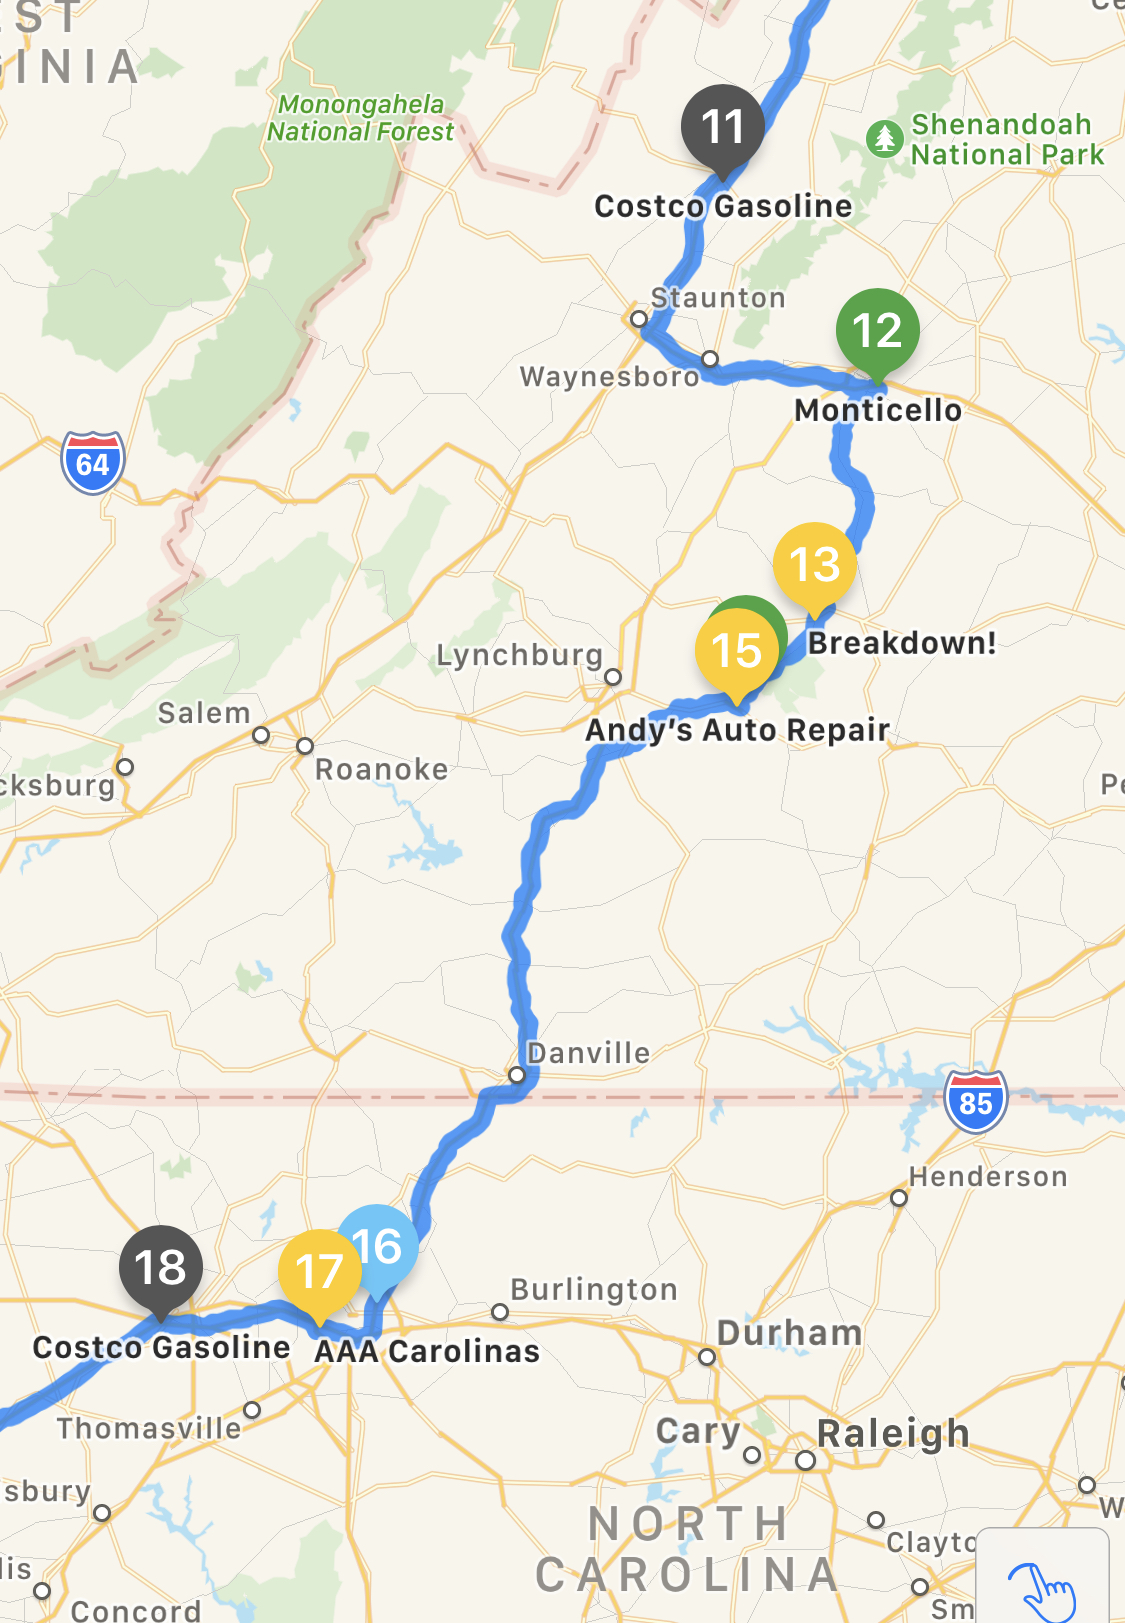 a map showing the route I took